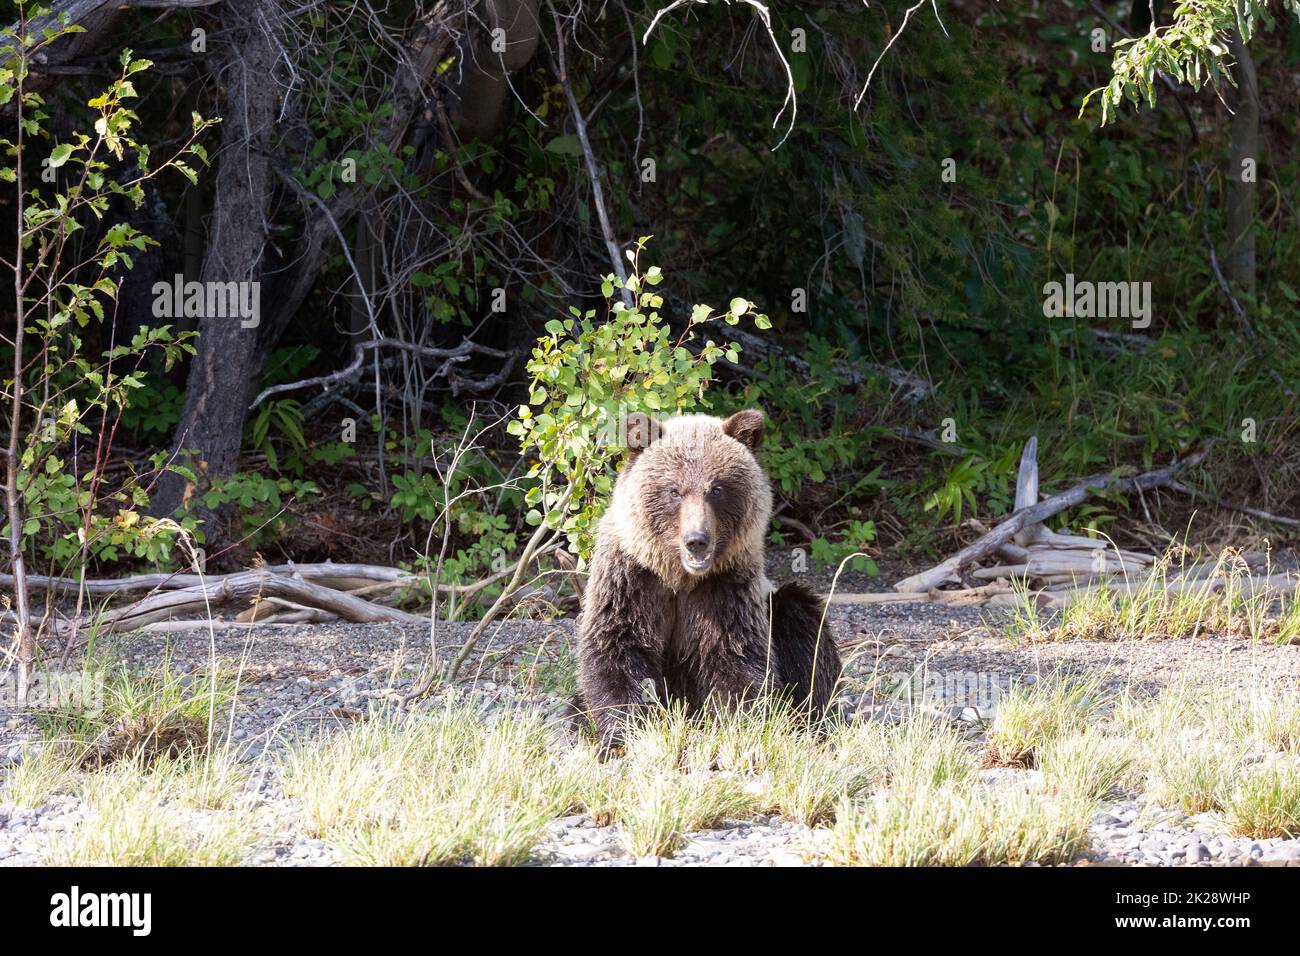 Blond Grizzly Cub Sitting Stock Photo